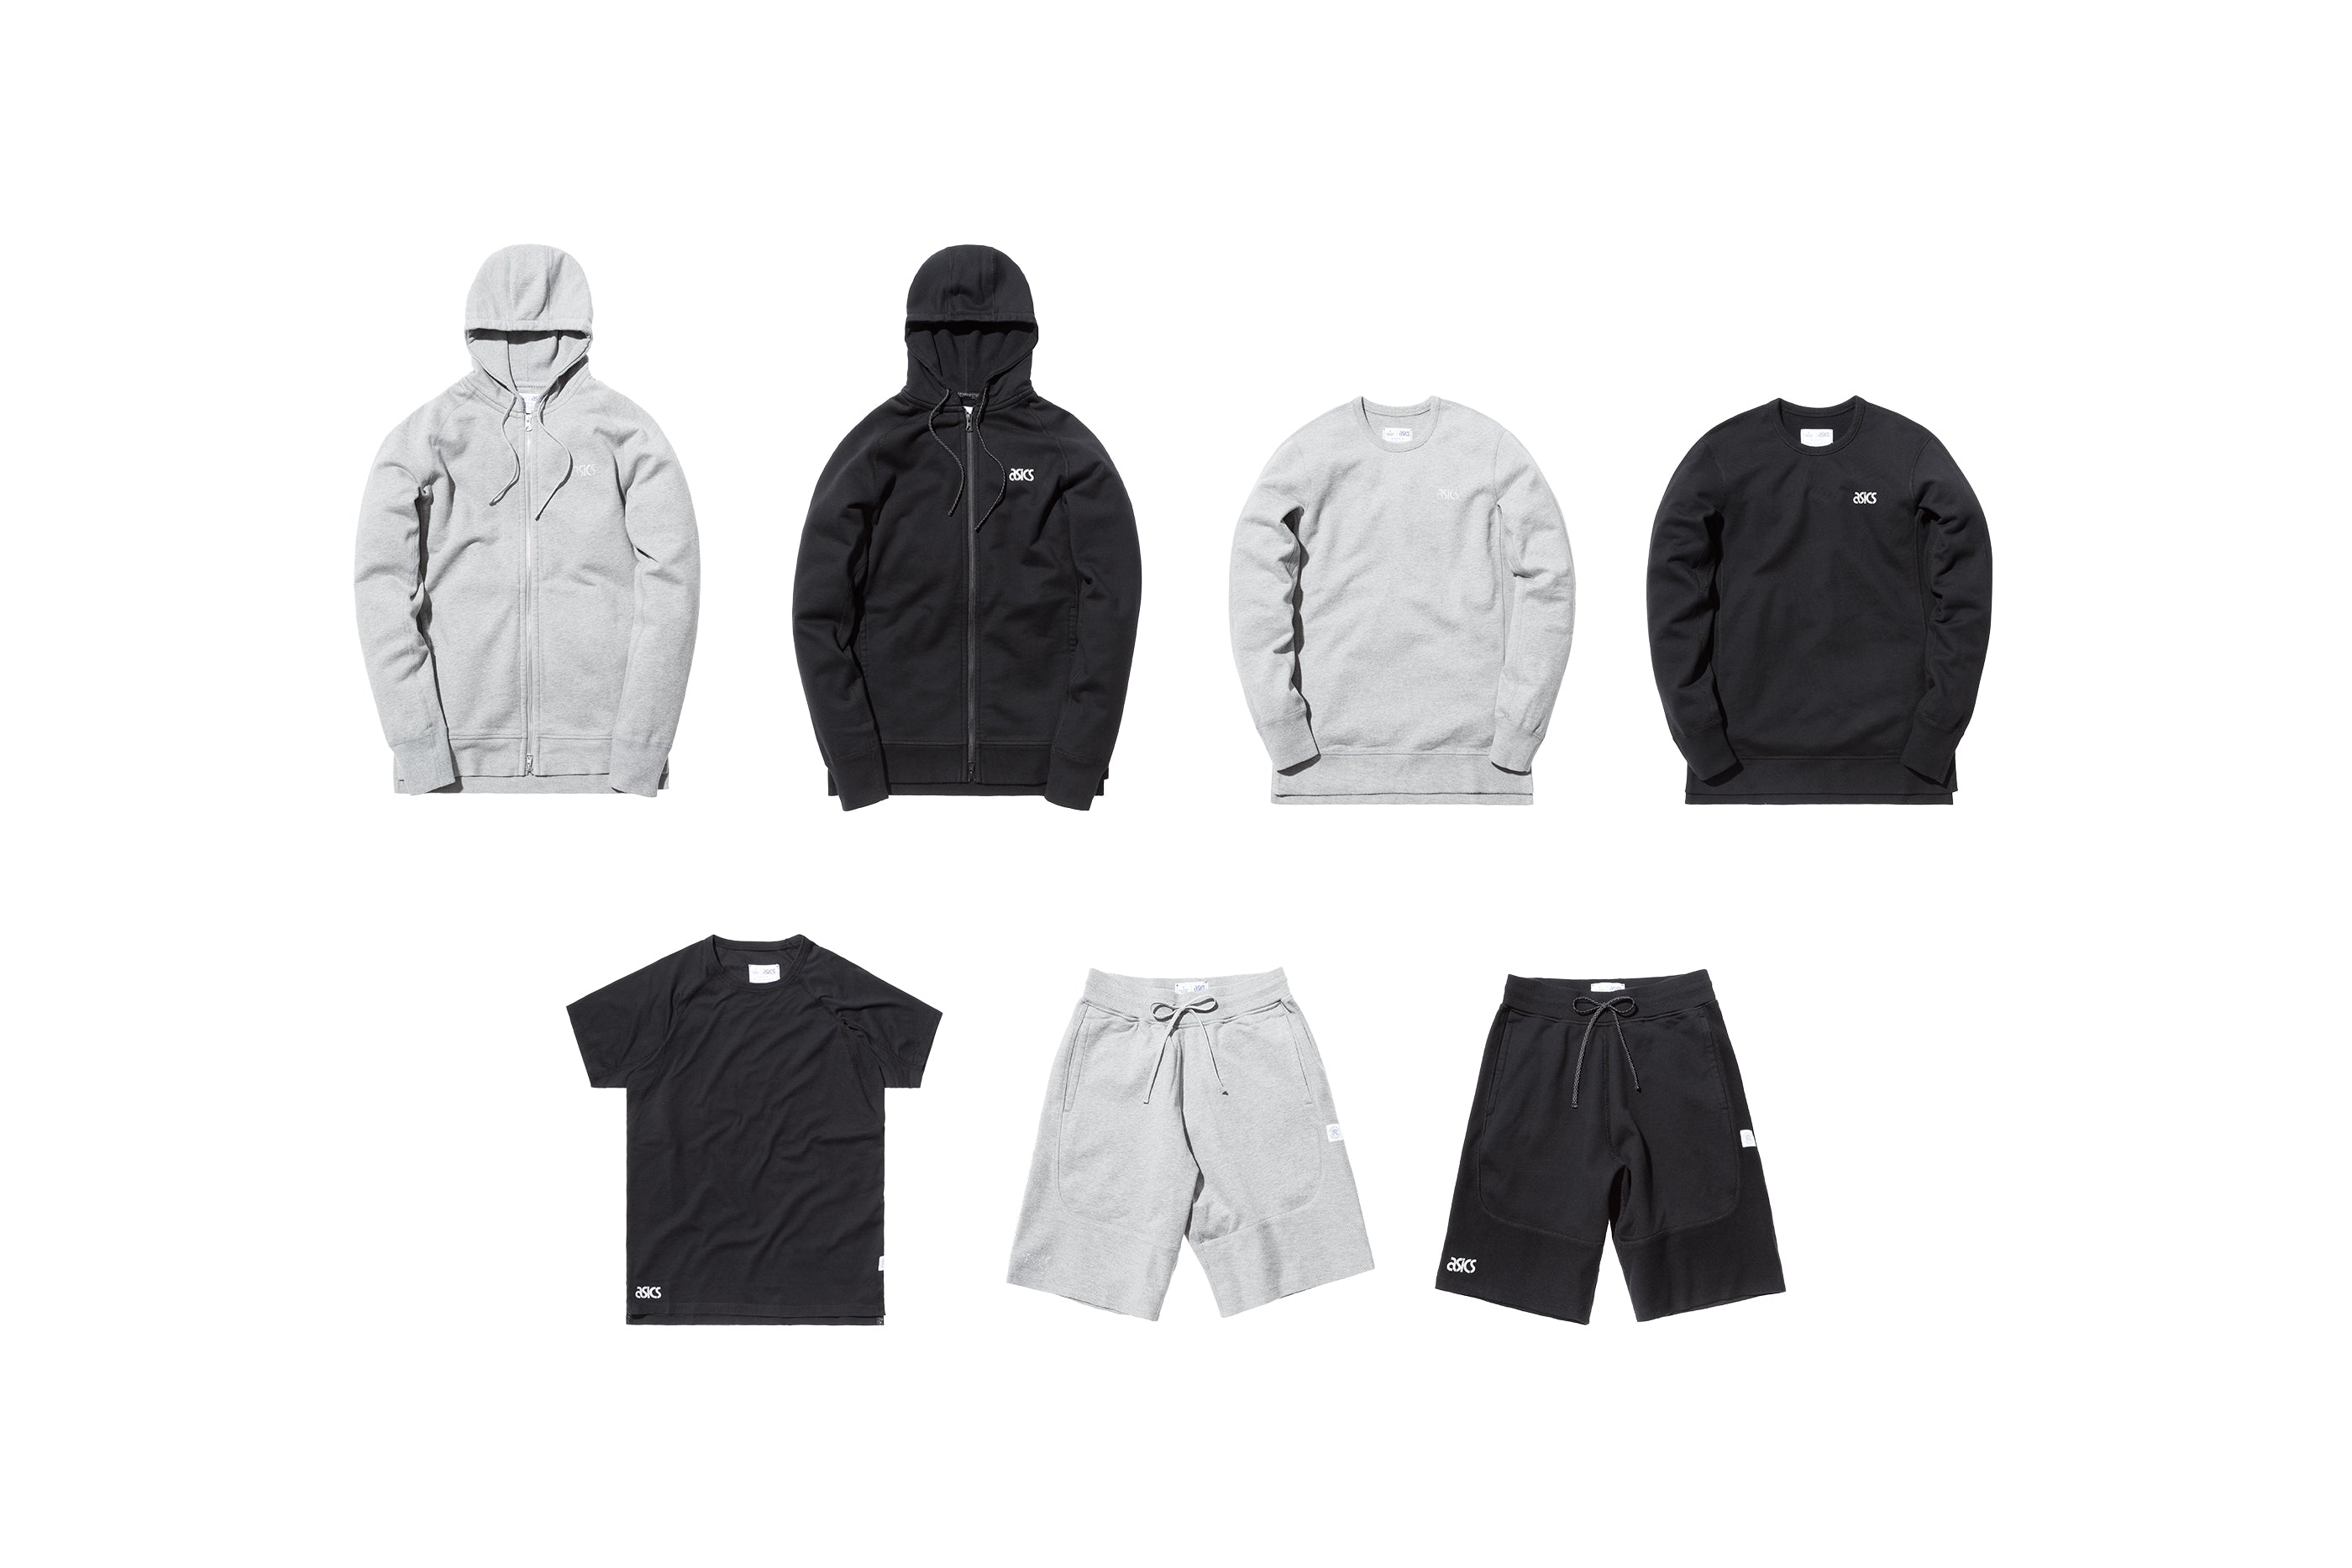 Asics x Reigning Champ Apparel Capsule – Kith